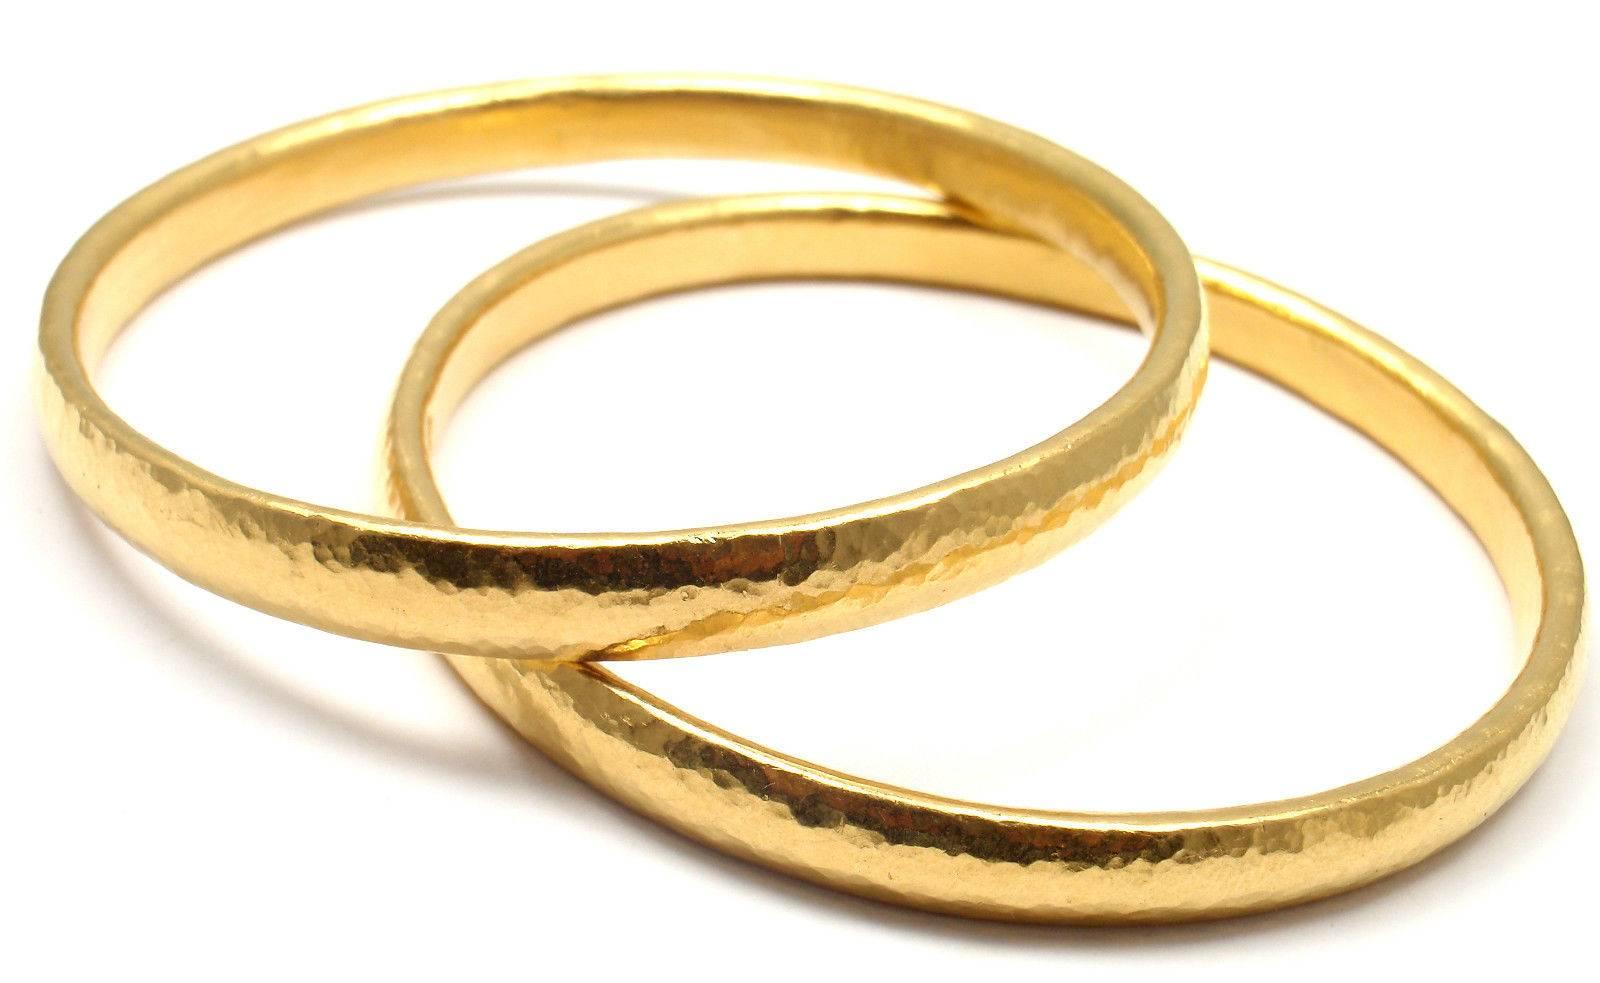 This is a set of two striking 24k Yellow Gold slip on bangle bracelets from the legendary GURHAN. 
These bracelets are SOLD OUT, when they were available the
Retail Price was $7,550 each x 2 $15,100 plus tax.

Measurements: 
Length: 8